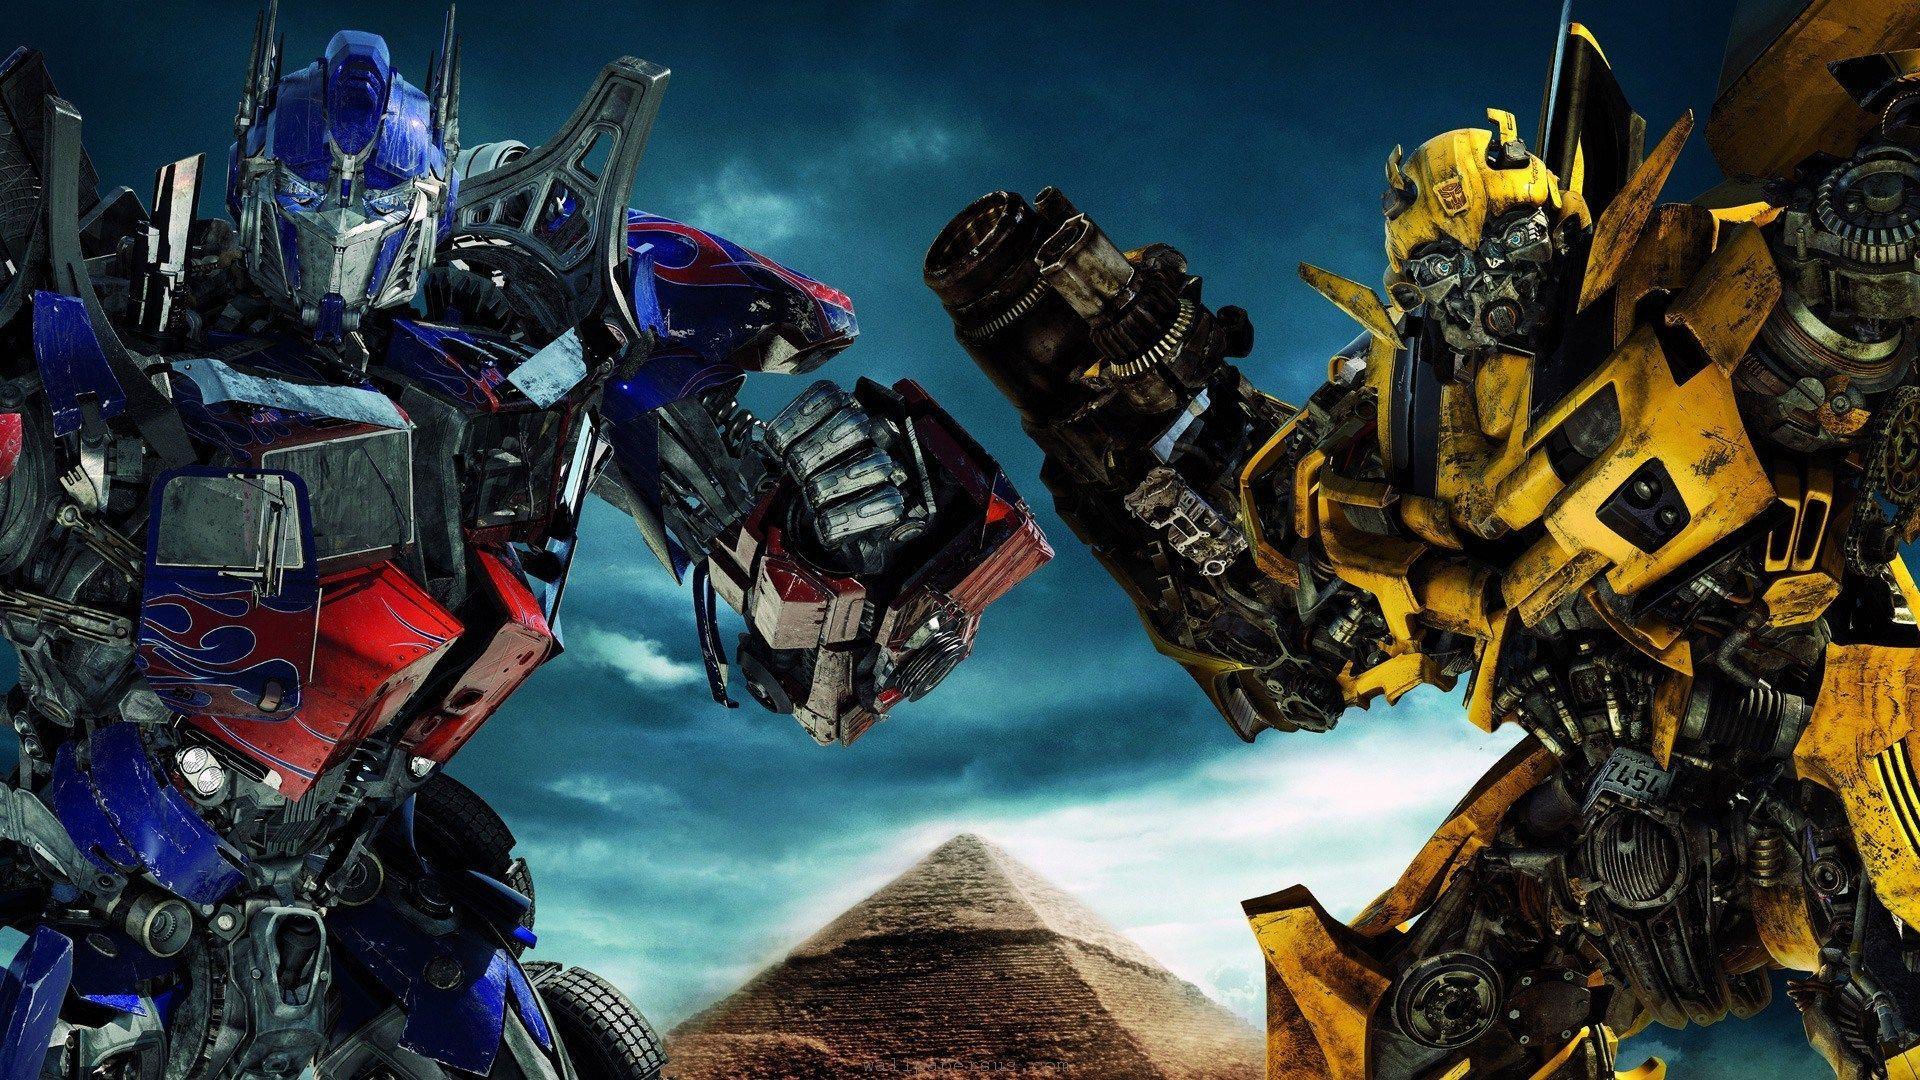 transformers wallpaper for desktop background. Movies & Casts